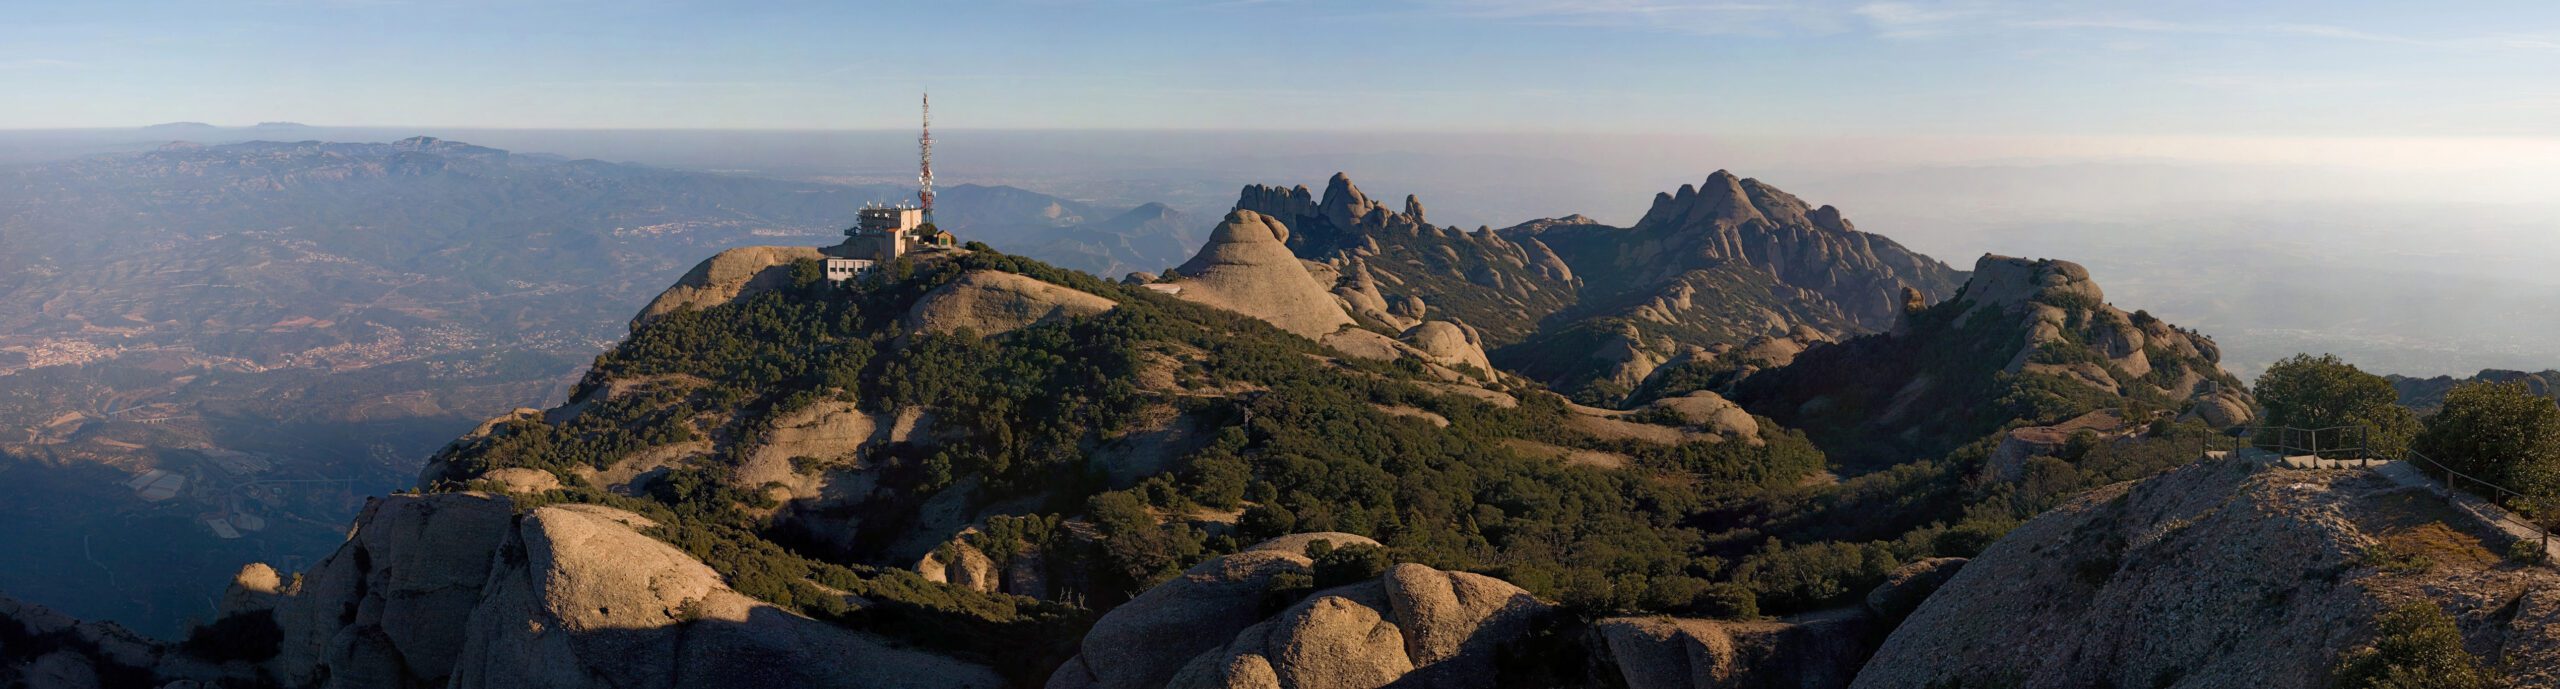 How to get to Montserrat from Barcelona